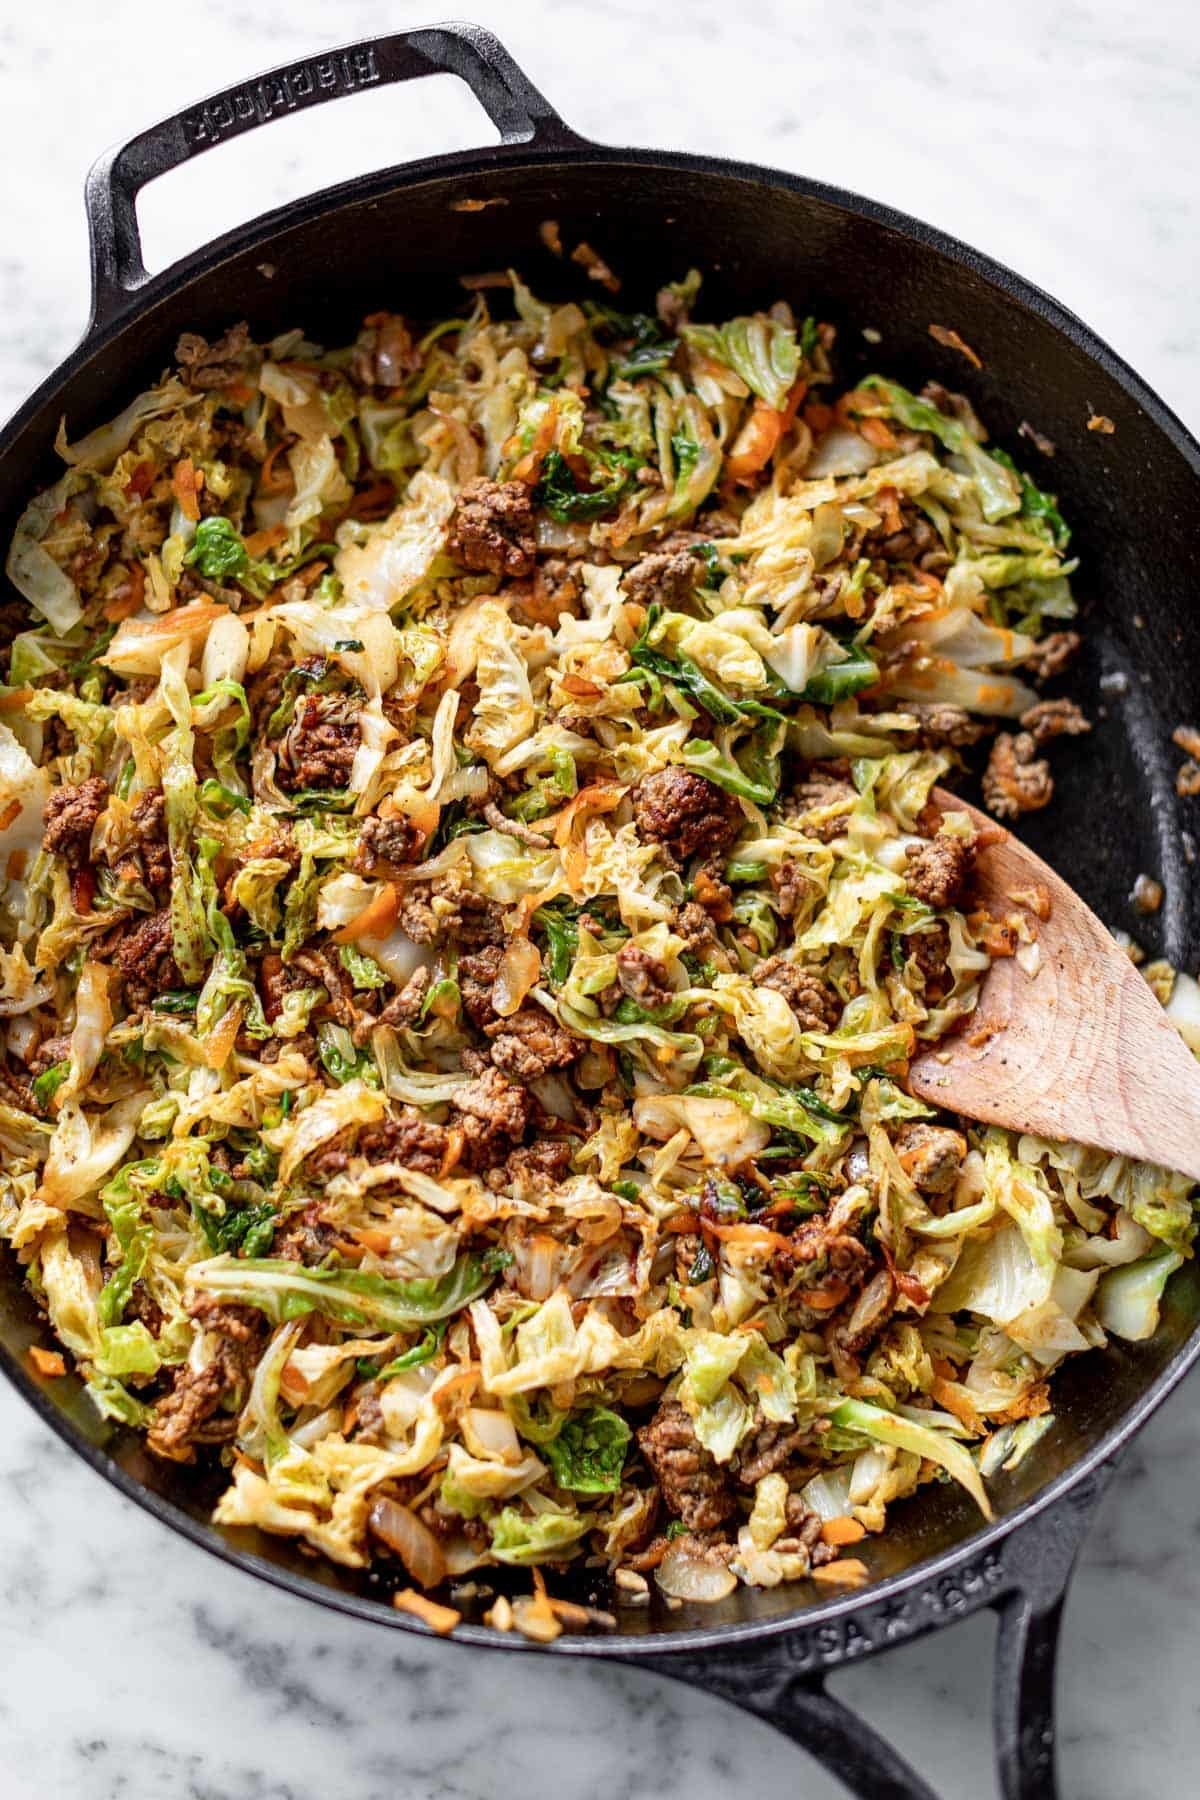 Ground beef stir fry with cabbage.